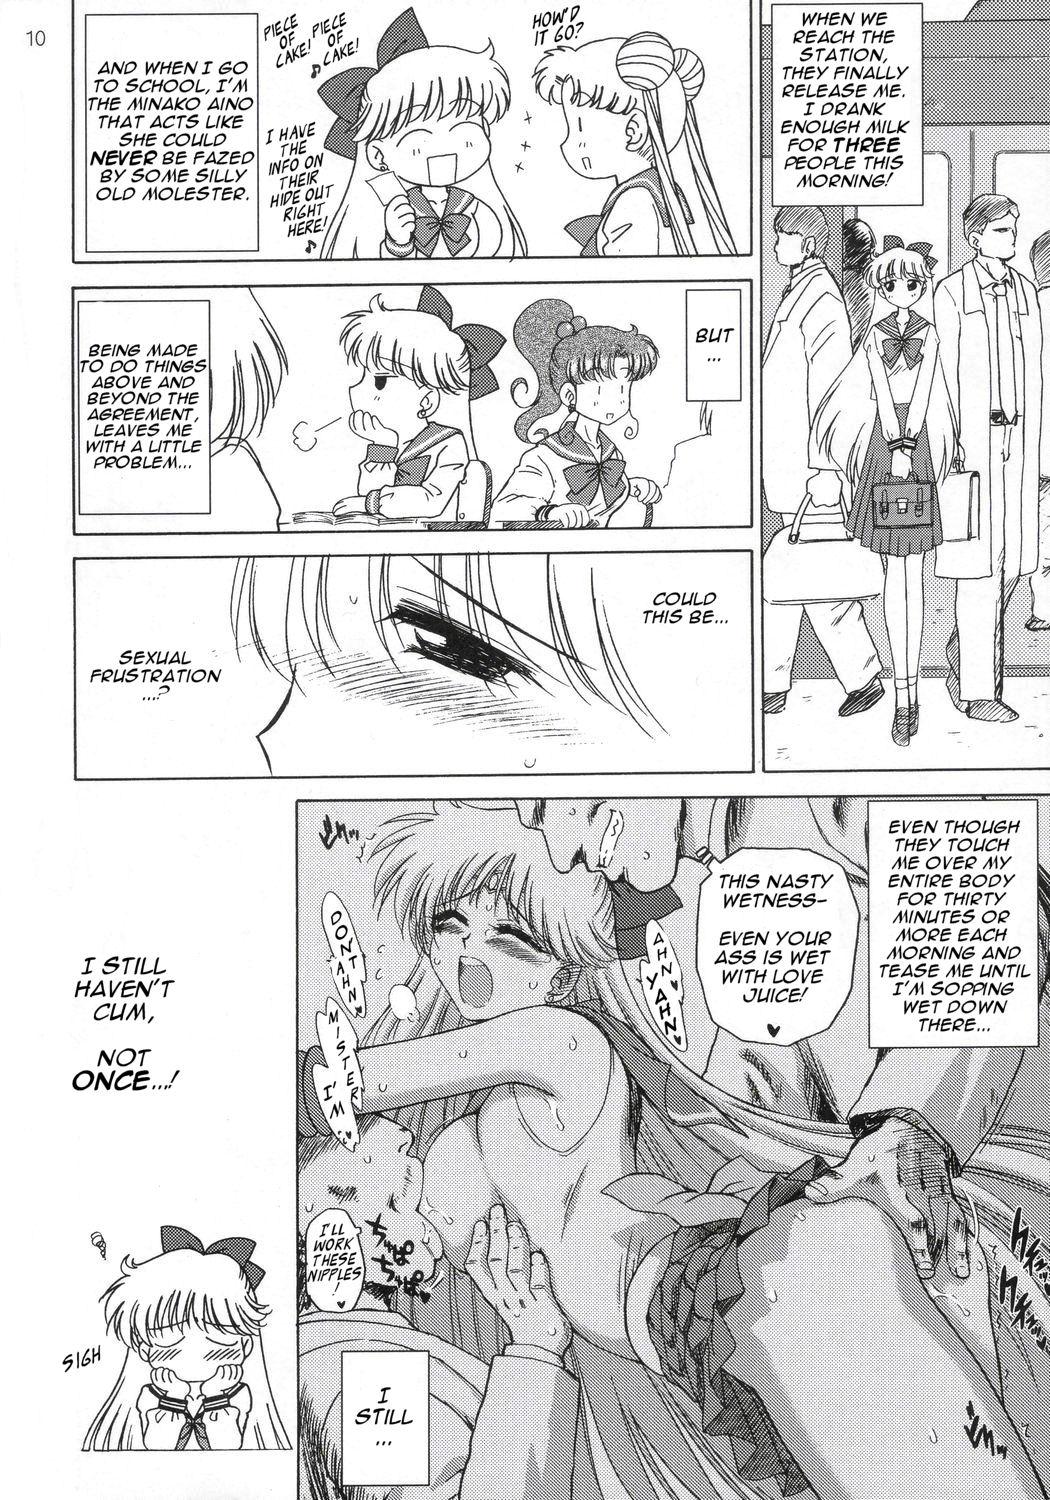 Czech Super Fly - Sailor moon Fuck Me Hard - Page 9